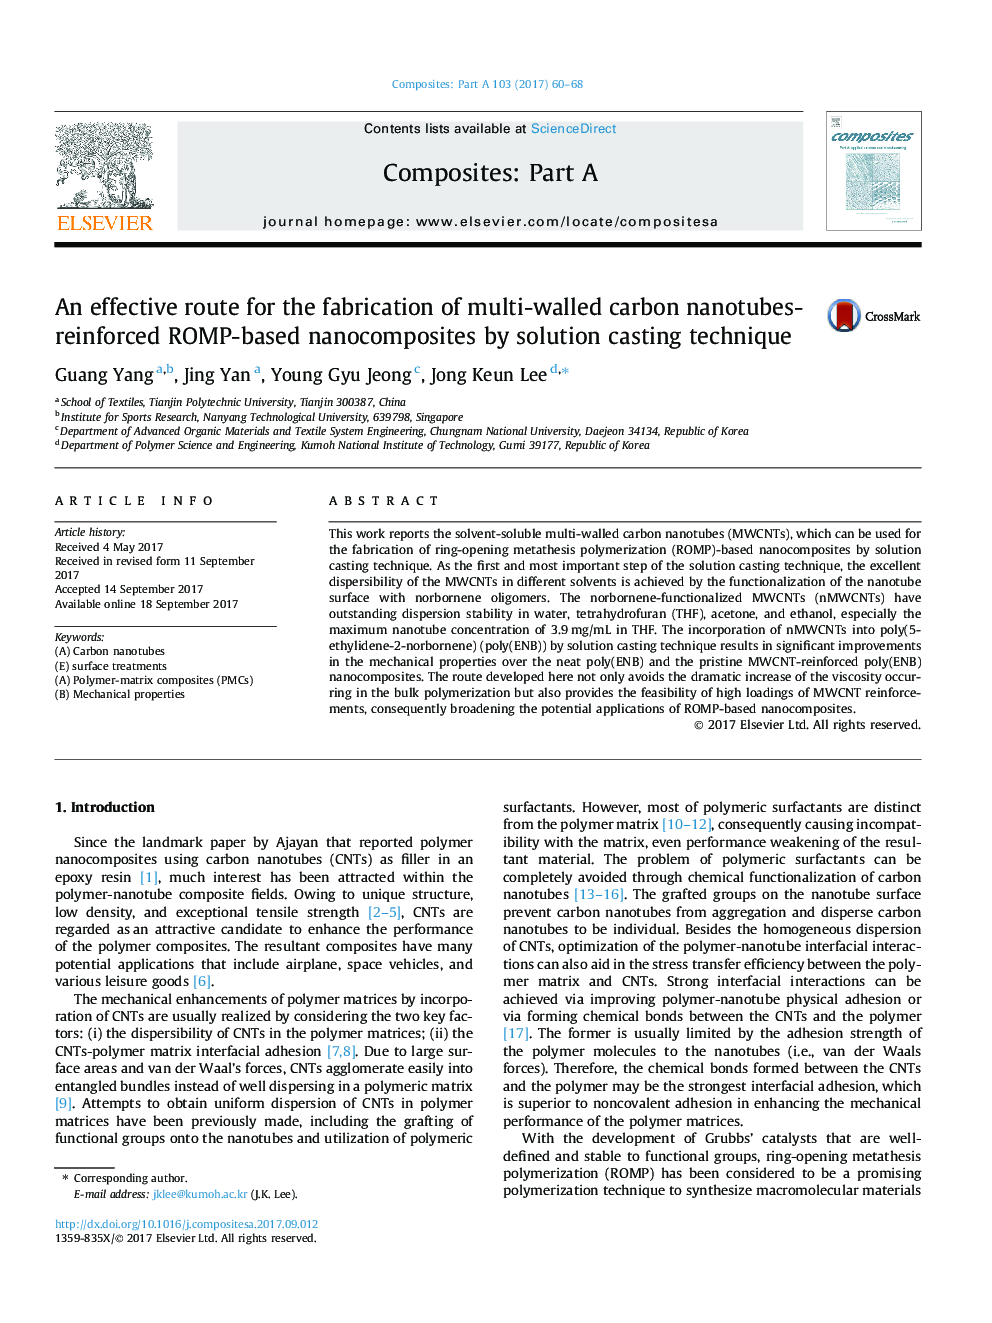 An effective route for the fabrication of multi-walled carbon nanotubes-reinforced ROMP-based nanocomposites by solution casting technique